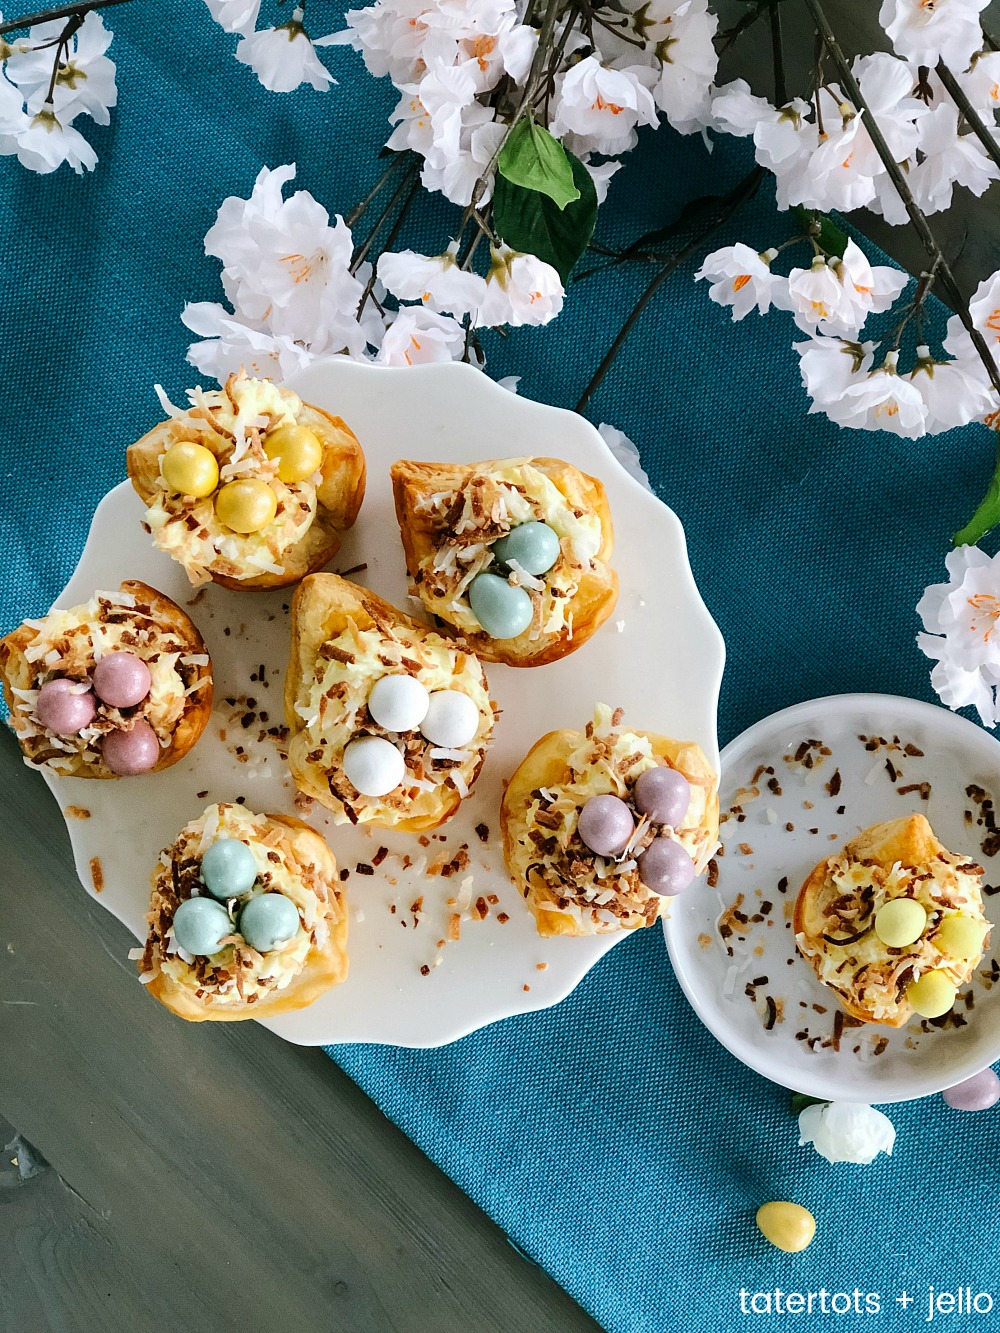 Robin Nests with Whipped Cream Filling - the perfect Spring and Easter treat! Flaky layers of baked puff pastry dough cups cradle creamy, whipped filling topped by toasted coconut and rich chocolate eggs. Bake up a beautiful dessert for Spring and Easter in just minutes!